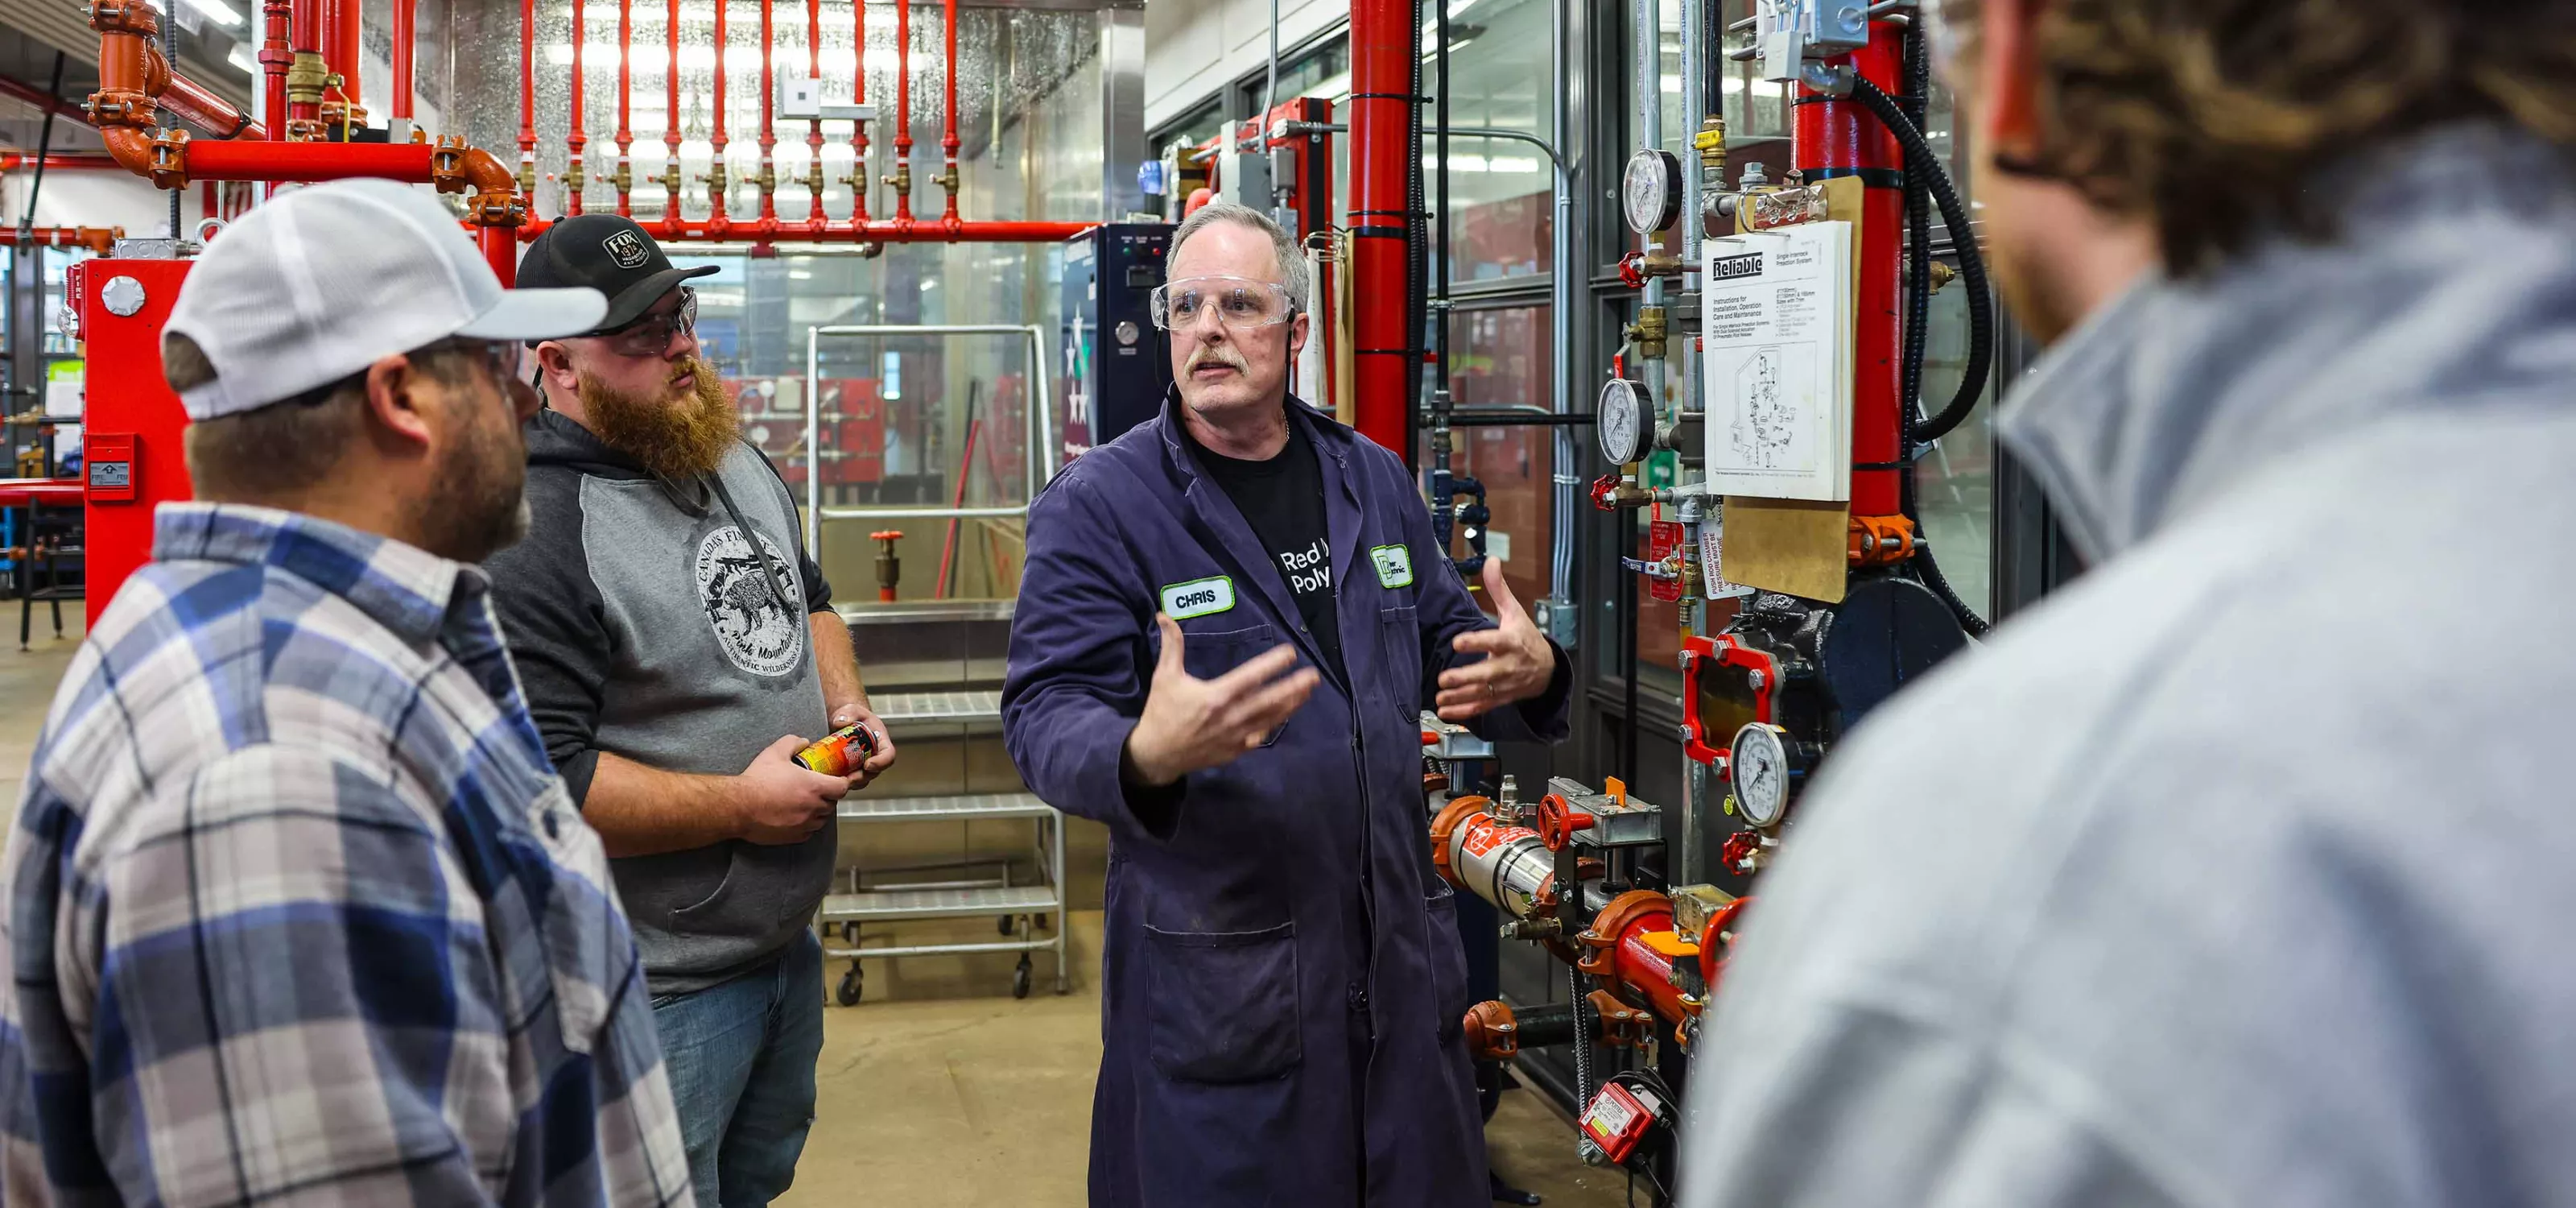 Sprinkler Systems instructor teaching students in lab